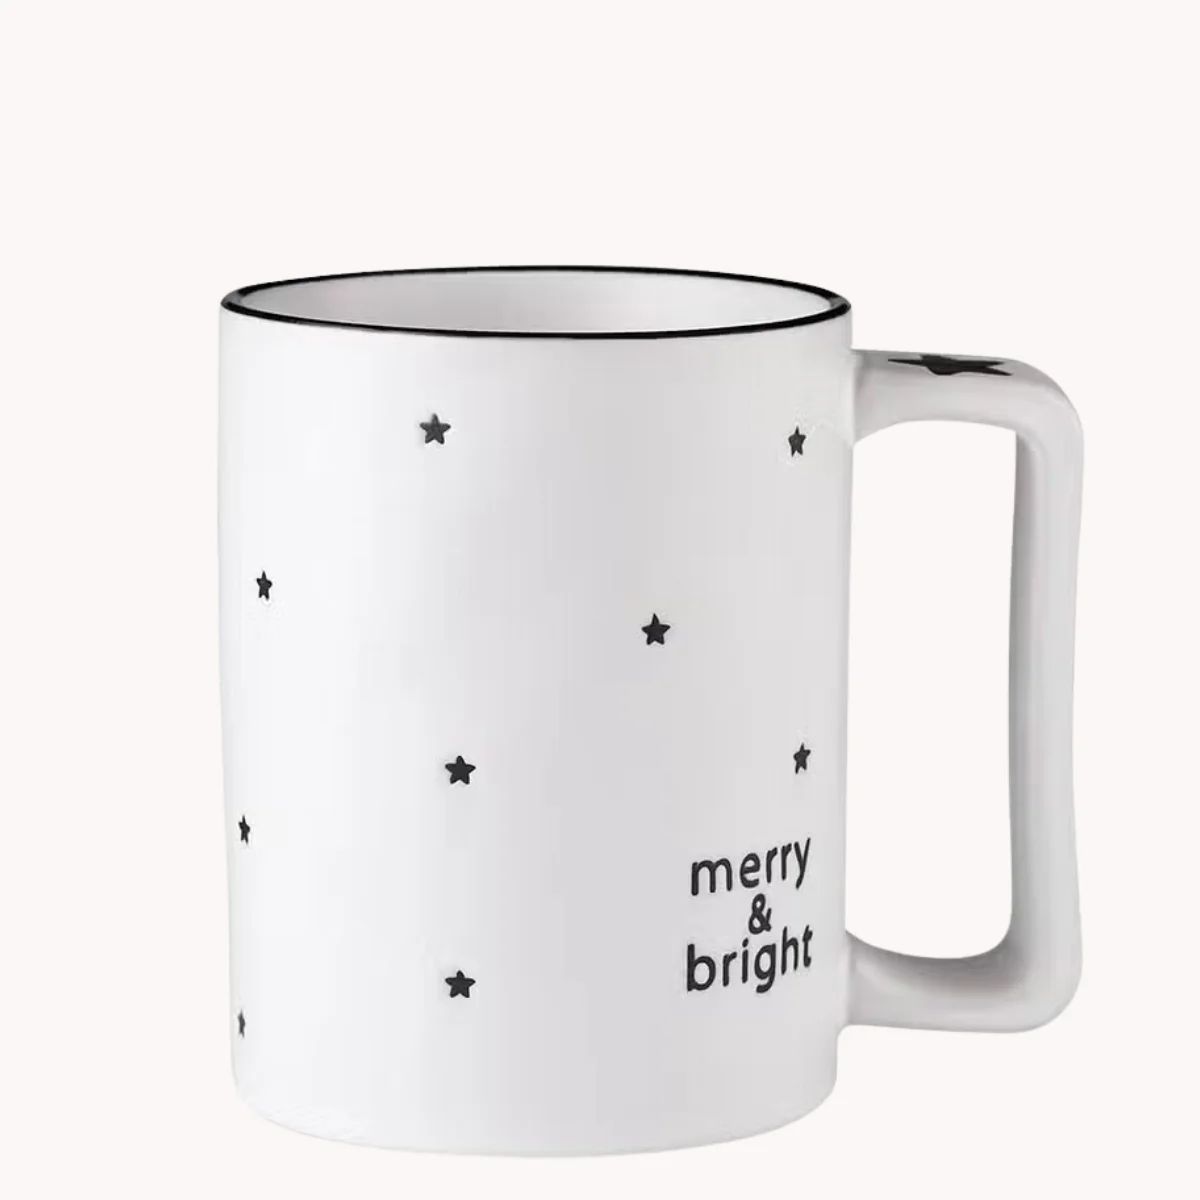 Holiday Merry & Bright Mug | Finding Home Farms